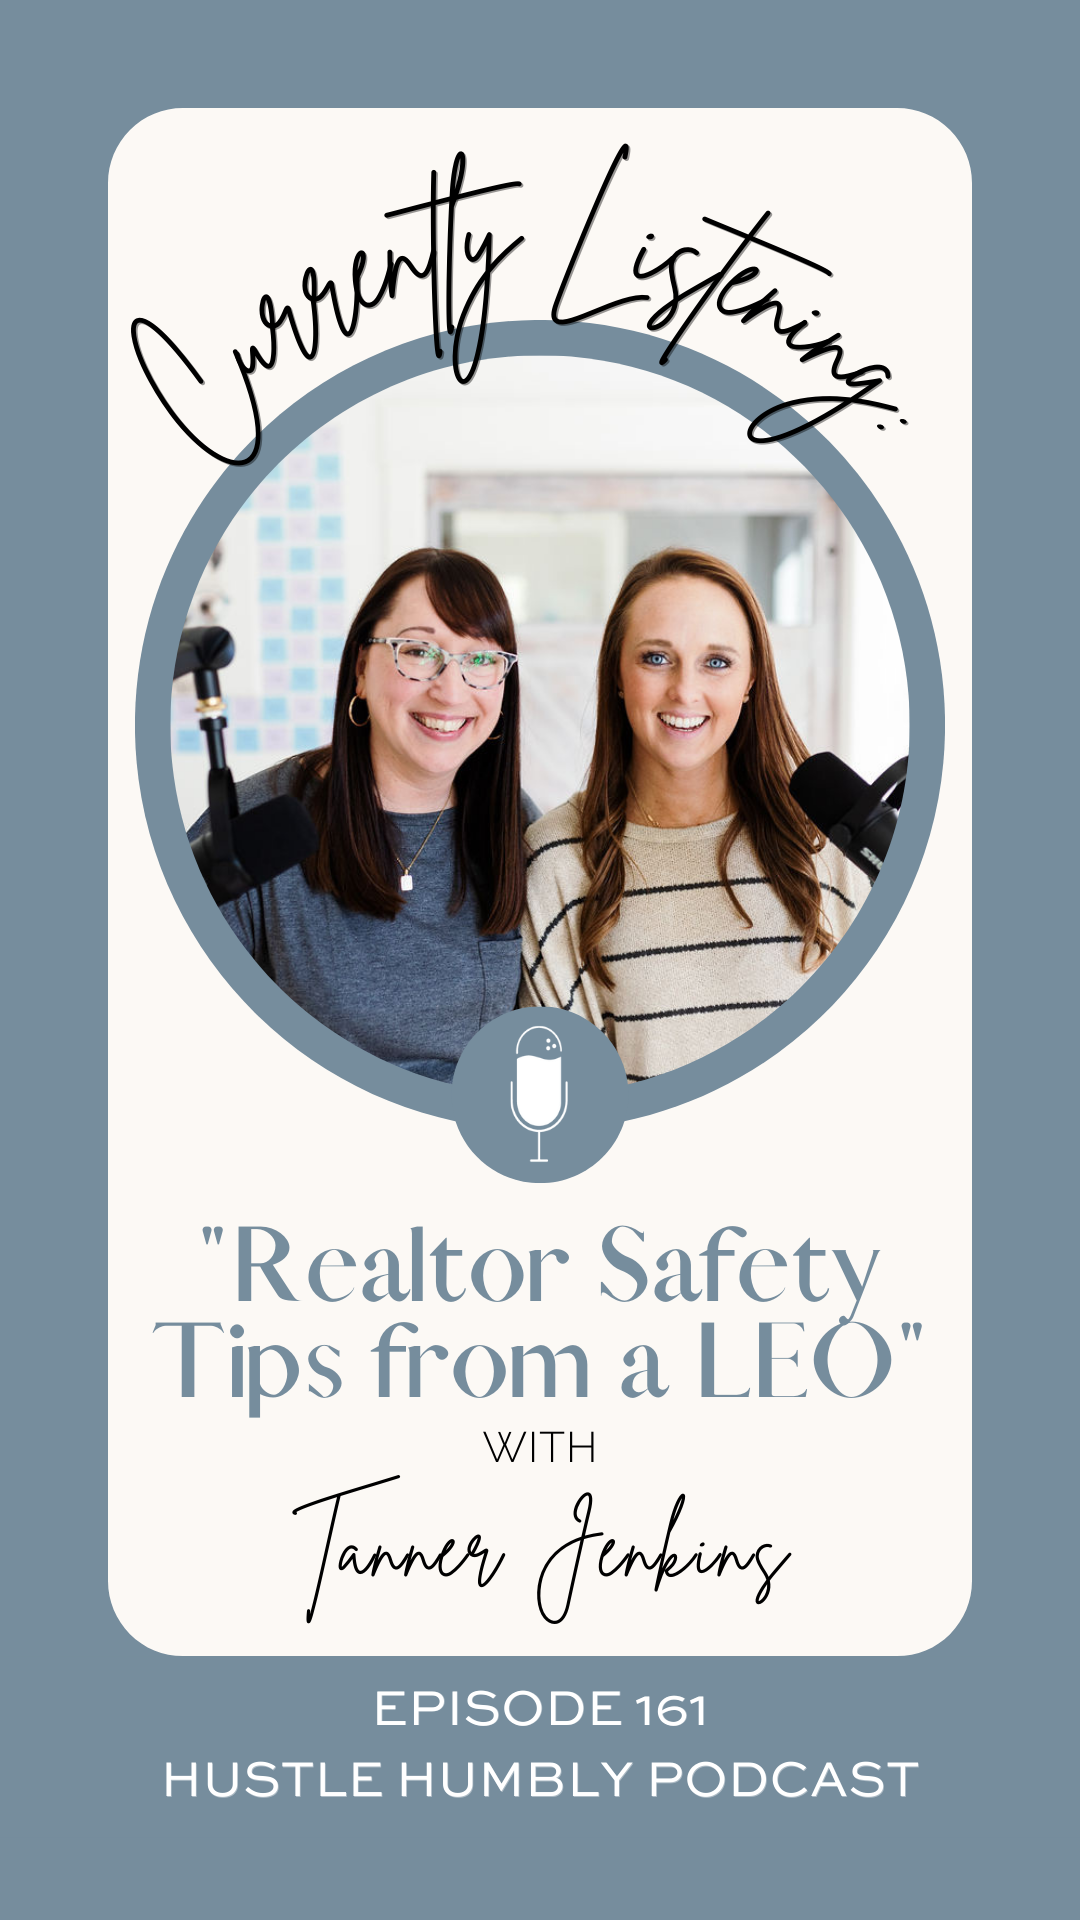 Hustle Humbly Podcast Episode 161: Realtor Safety Tips from a LEO